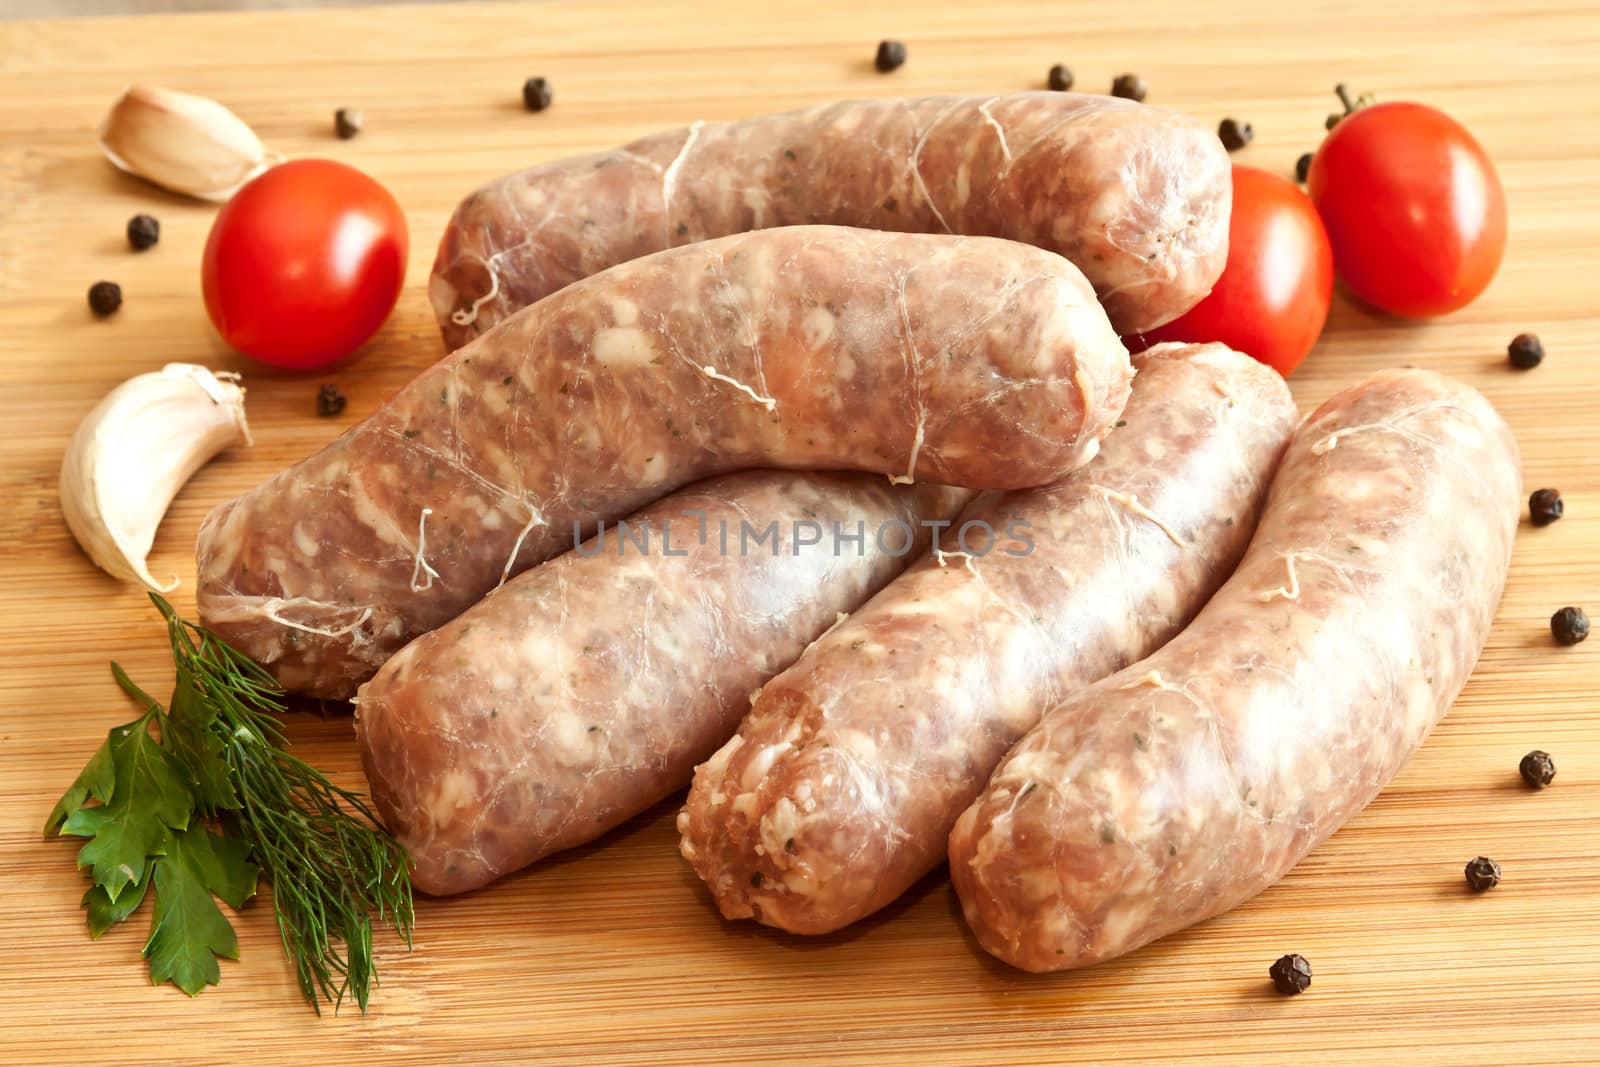 Uncooked sausages with vegetables on the chopping board by evp82